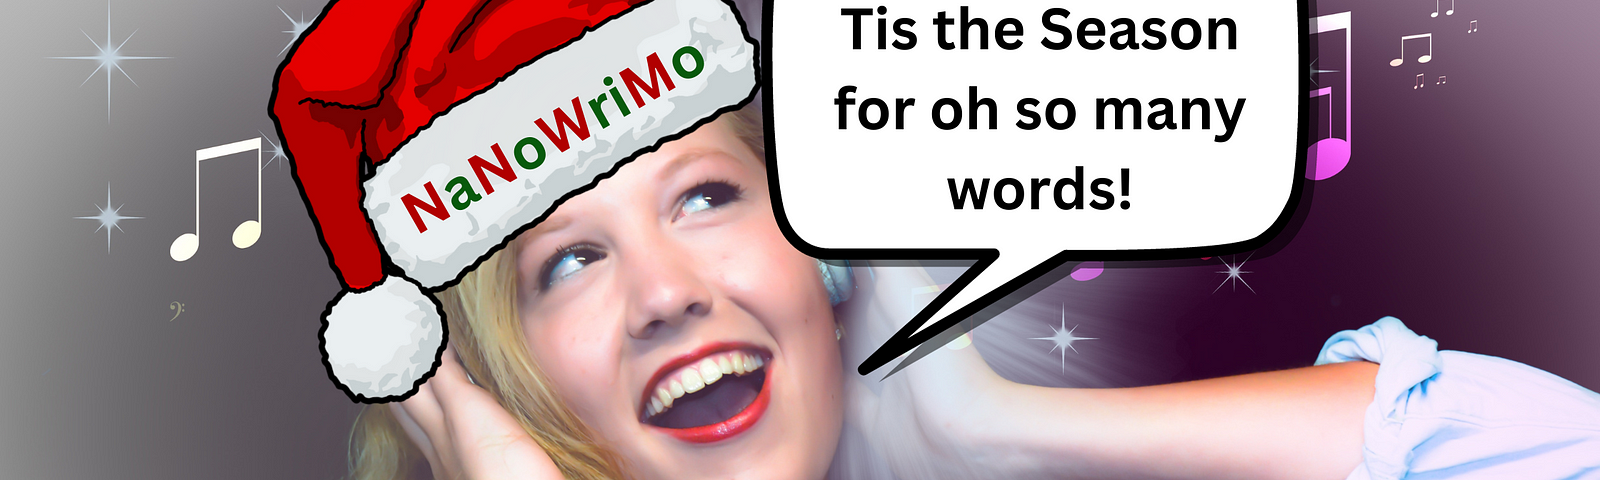 A woman with her hands around her ears and a Santa cap on her head singing. The Santa cap says NaNoWriMo across the white band in Red and Green. There is a text box to the right of her with the words “10,967 to gooO! Tis the Season for oh so many words!” There are white and pink musical notes around her.